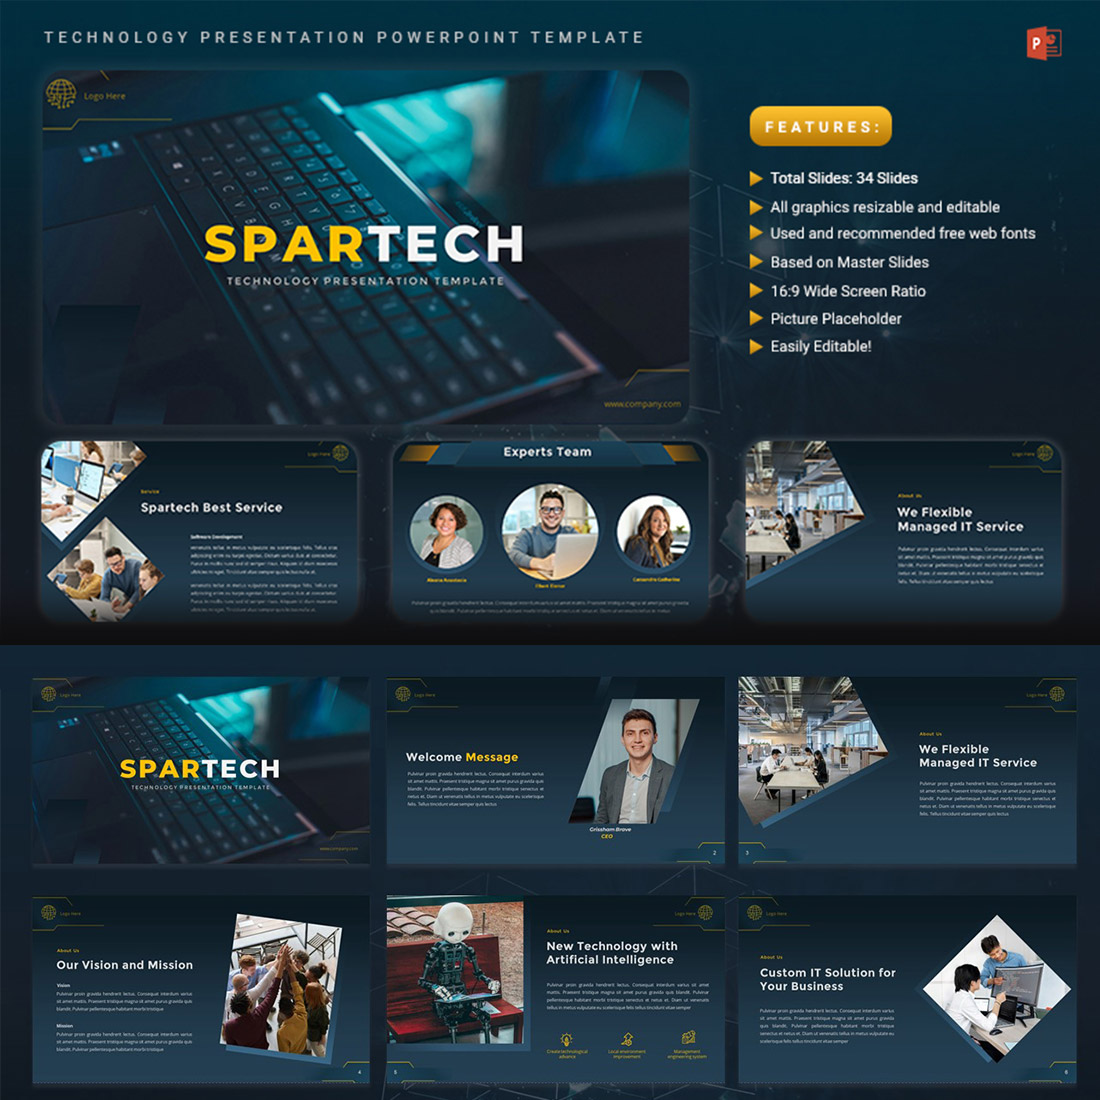 SPARTECH - Technology PowerPoint Template cover image.